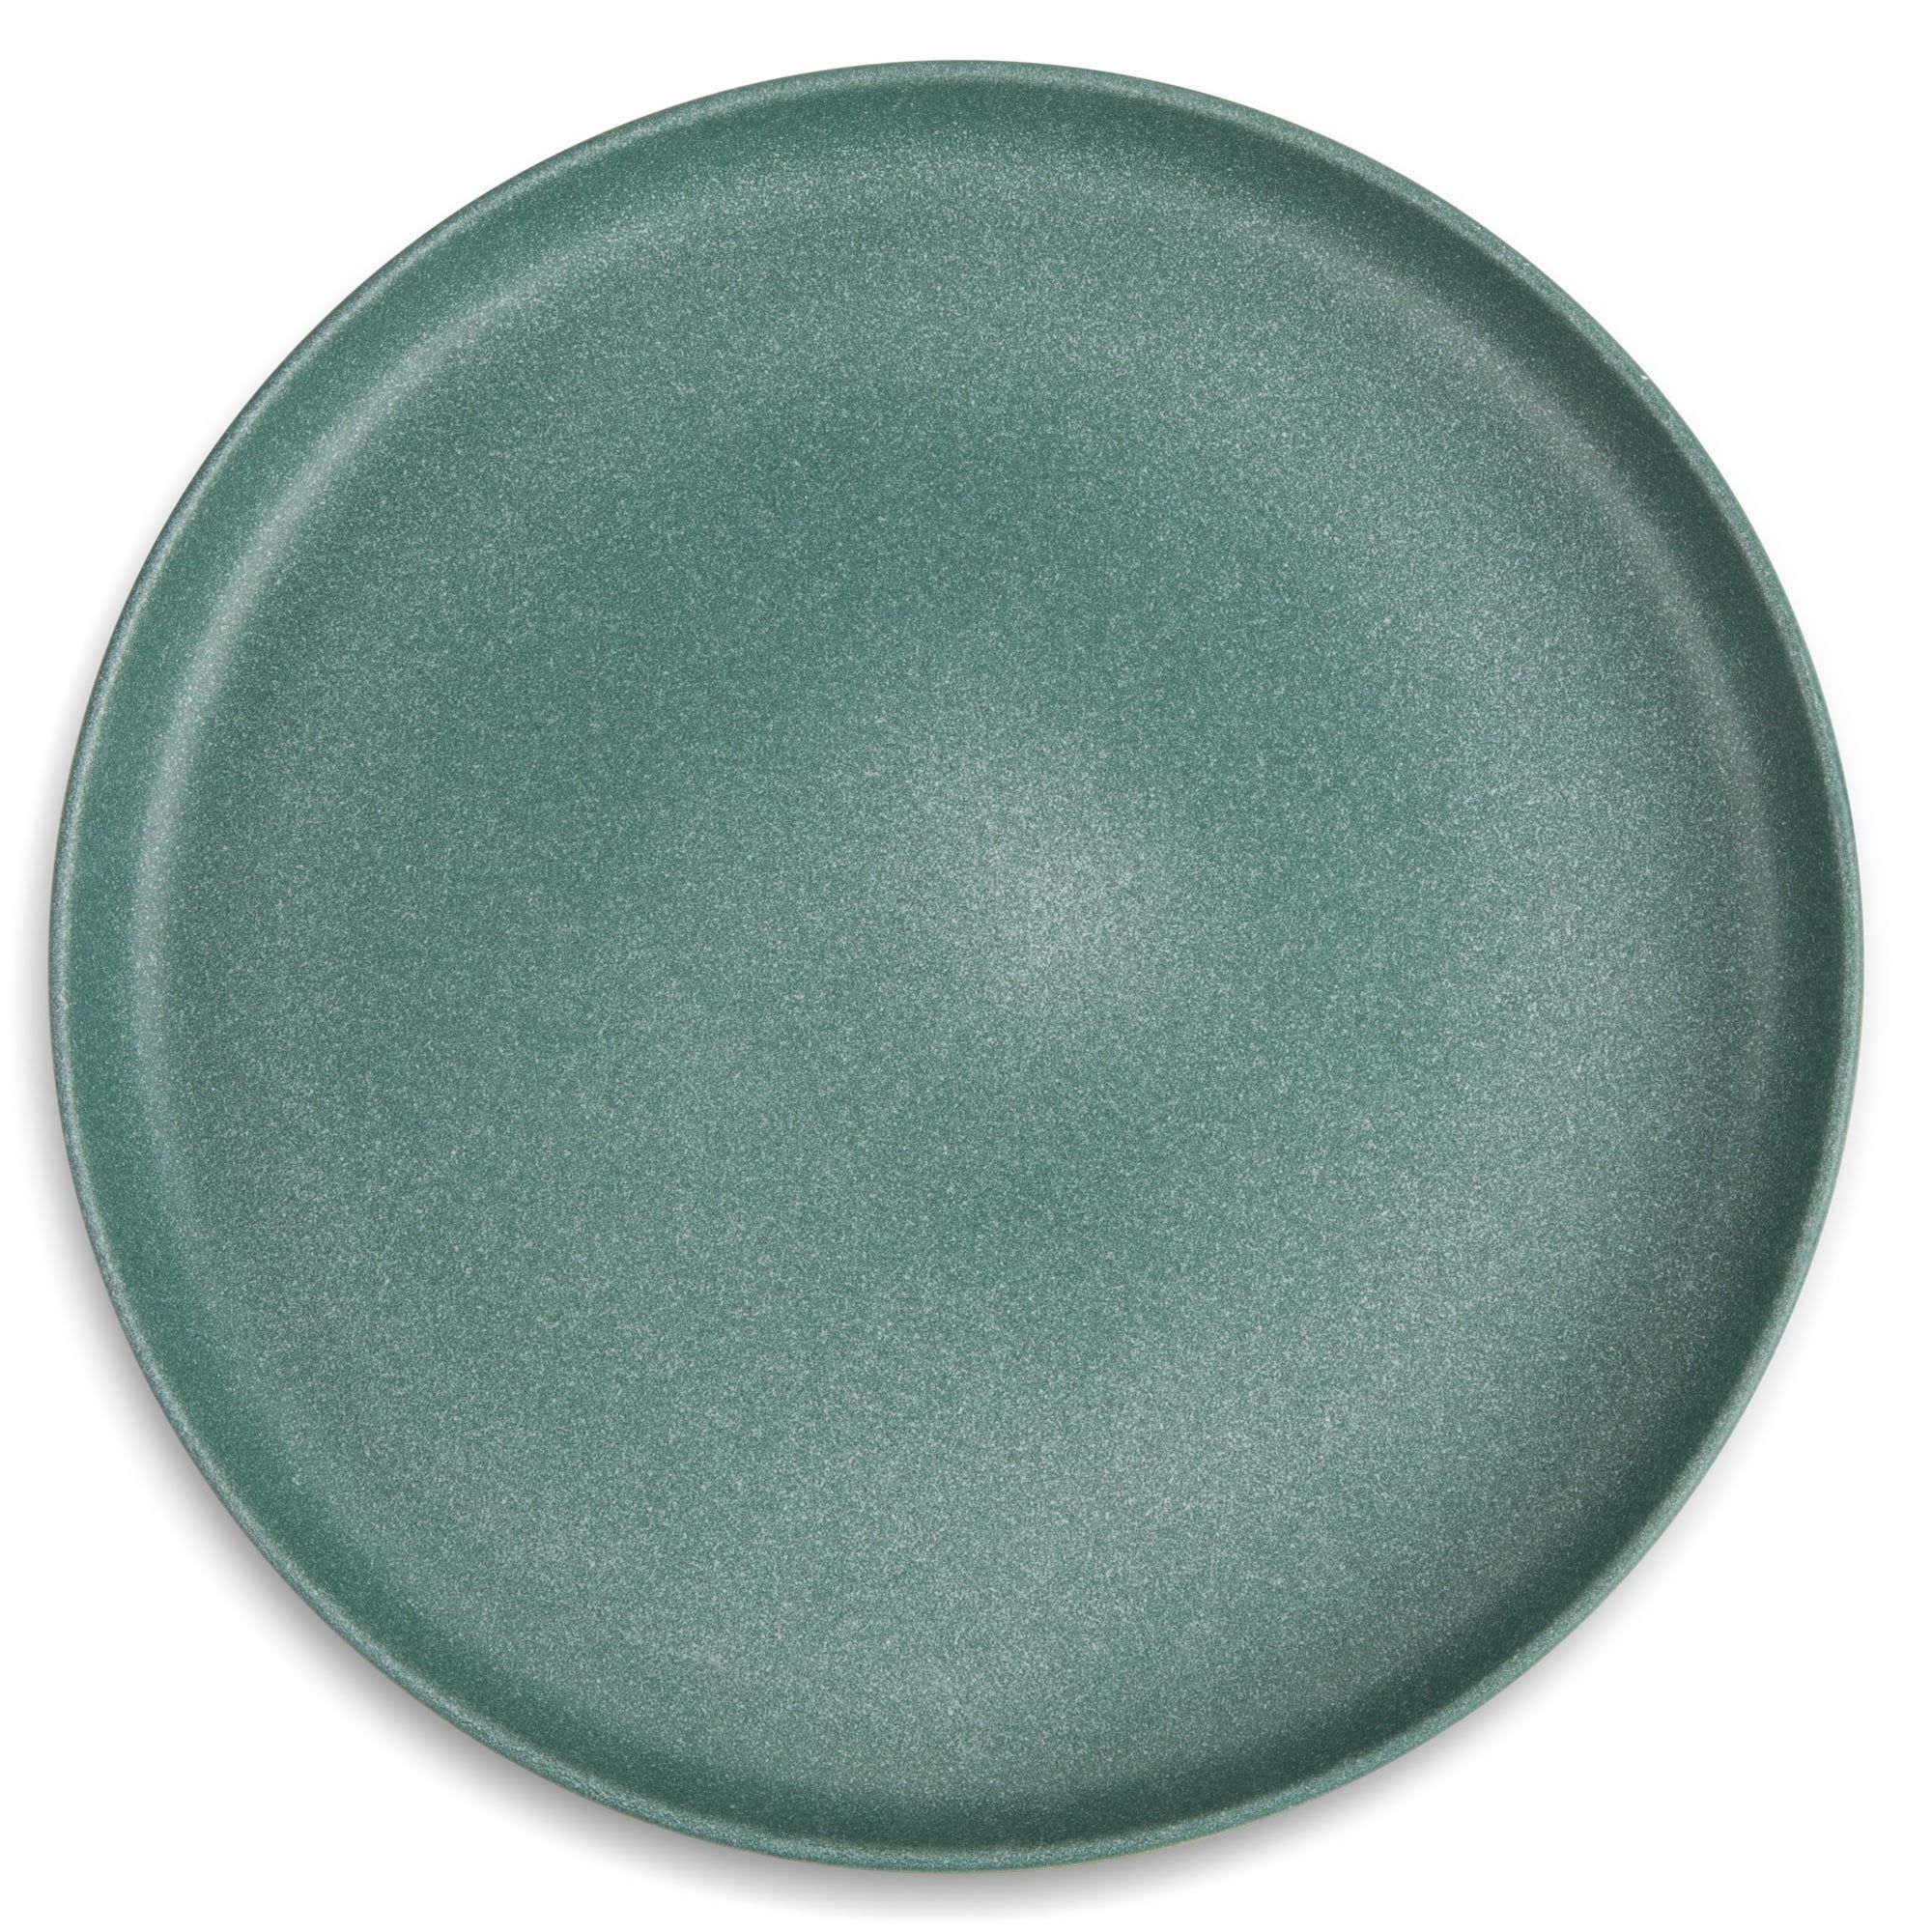 Thyme & Table Stoneware Round Dinner Plate, Casipan Green | Walmart (US)